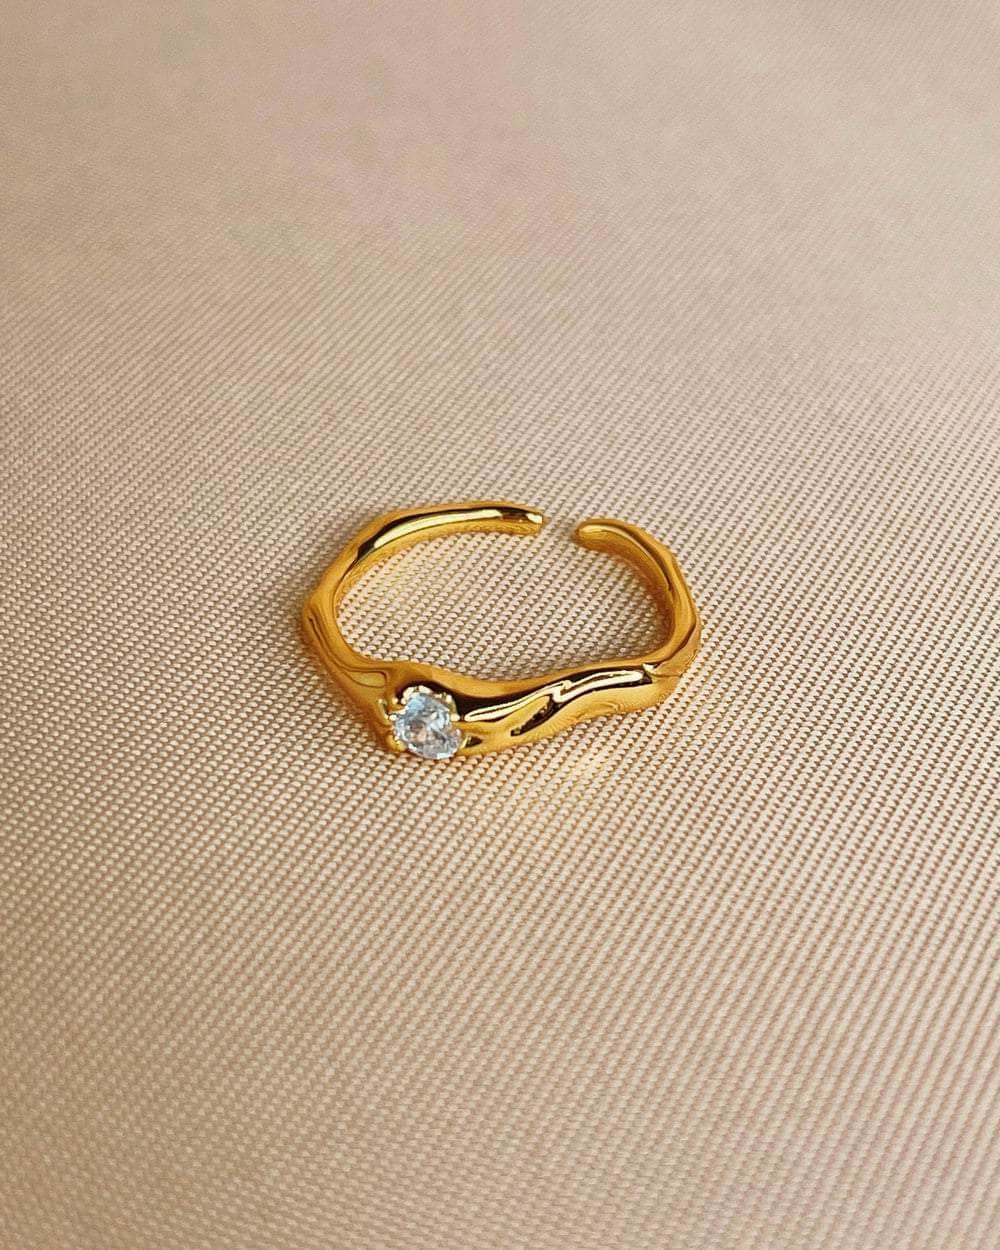 So Dainty Co. Rings Naomi Gold Ring Gold Plated 925 Sterling Silver Jewelry